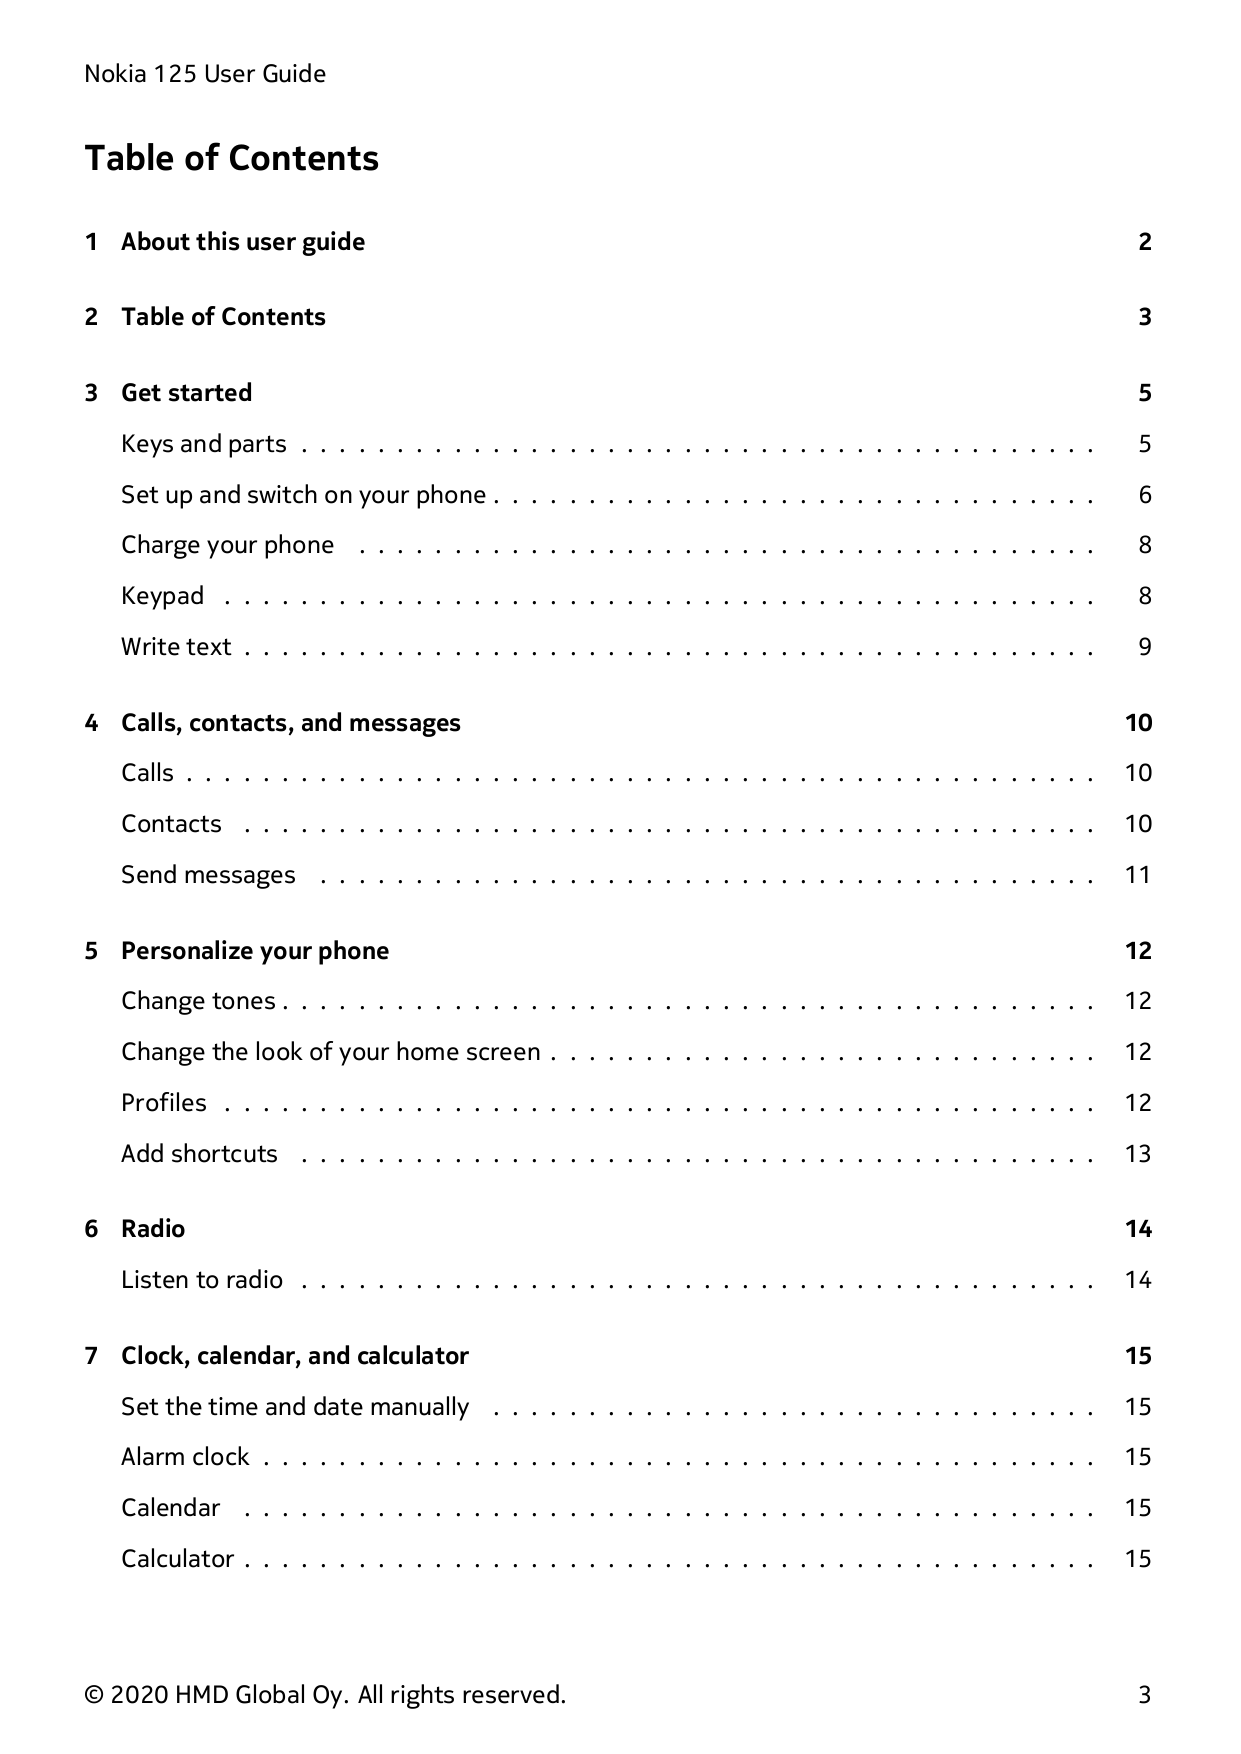 Nokia 125 User GuideTable of Contents1 About this user guide22 Table of Contents33 Get started5Keys and parts . . . . . . . . . 